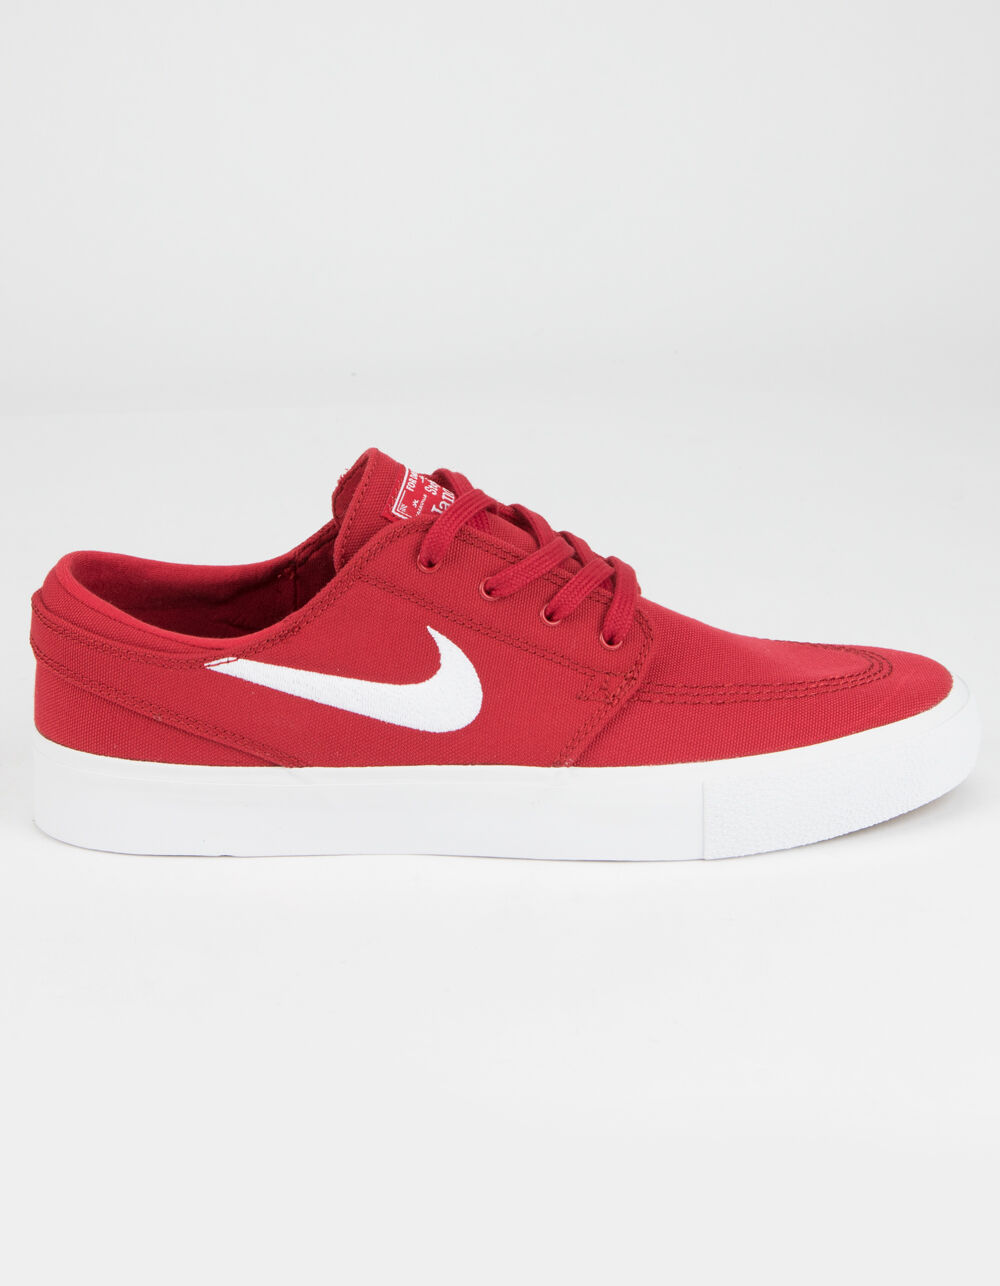 NIKE SB Janoski Canvas RM Red Shoes - RED |